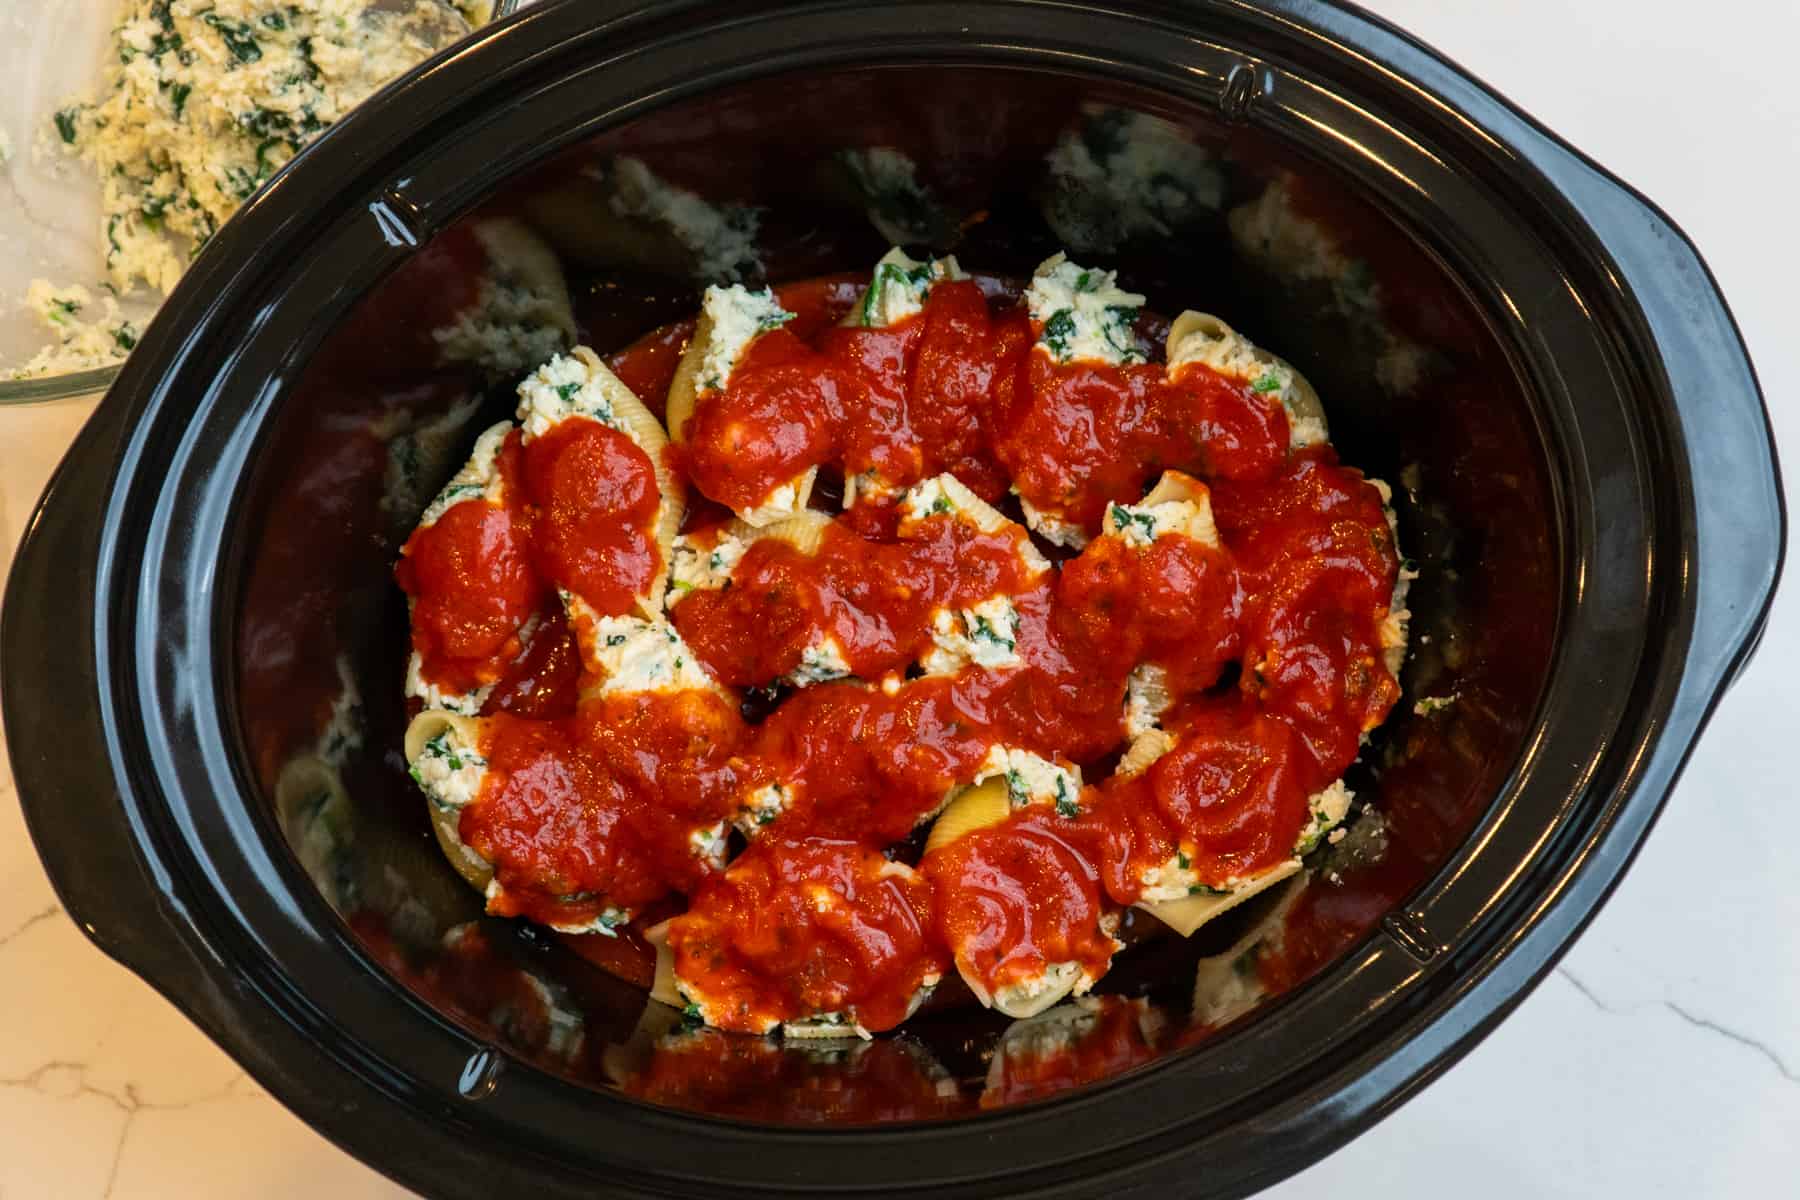 Stuffed shells in a slow cooker topped with marinara sauce.